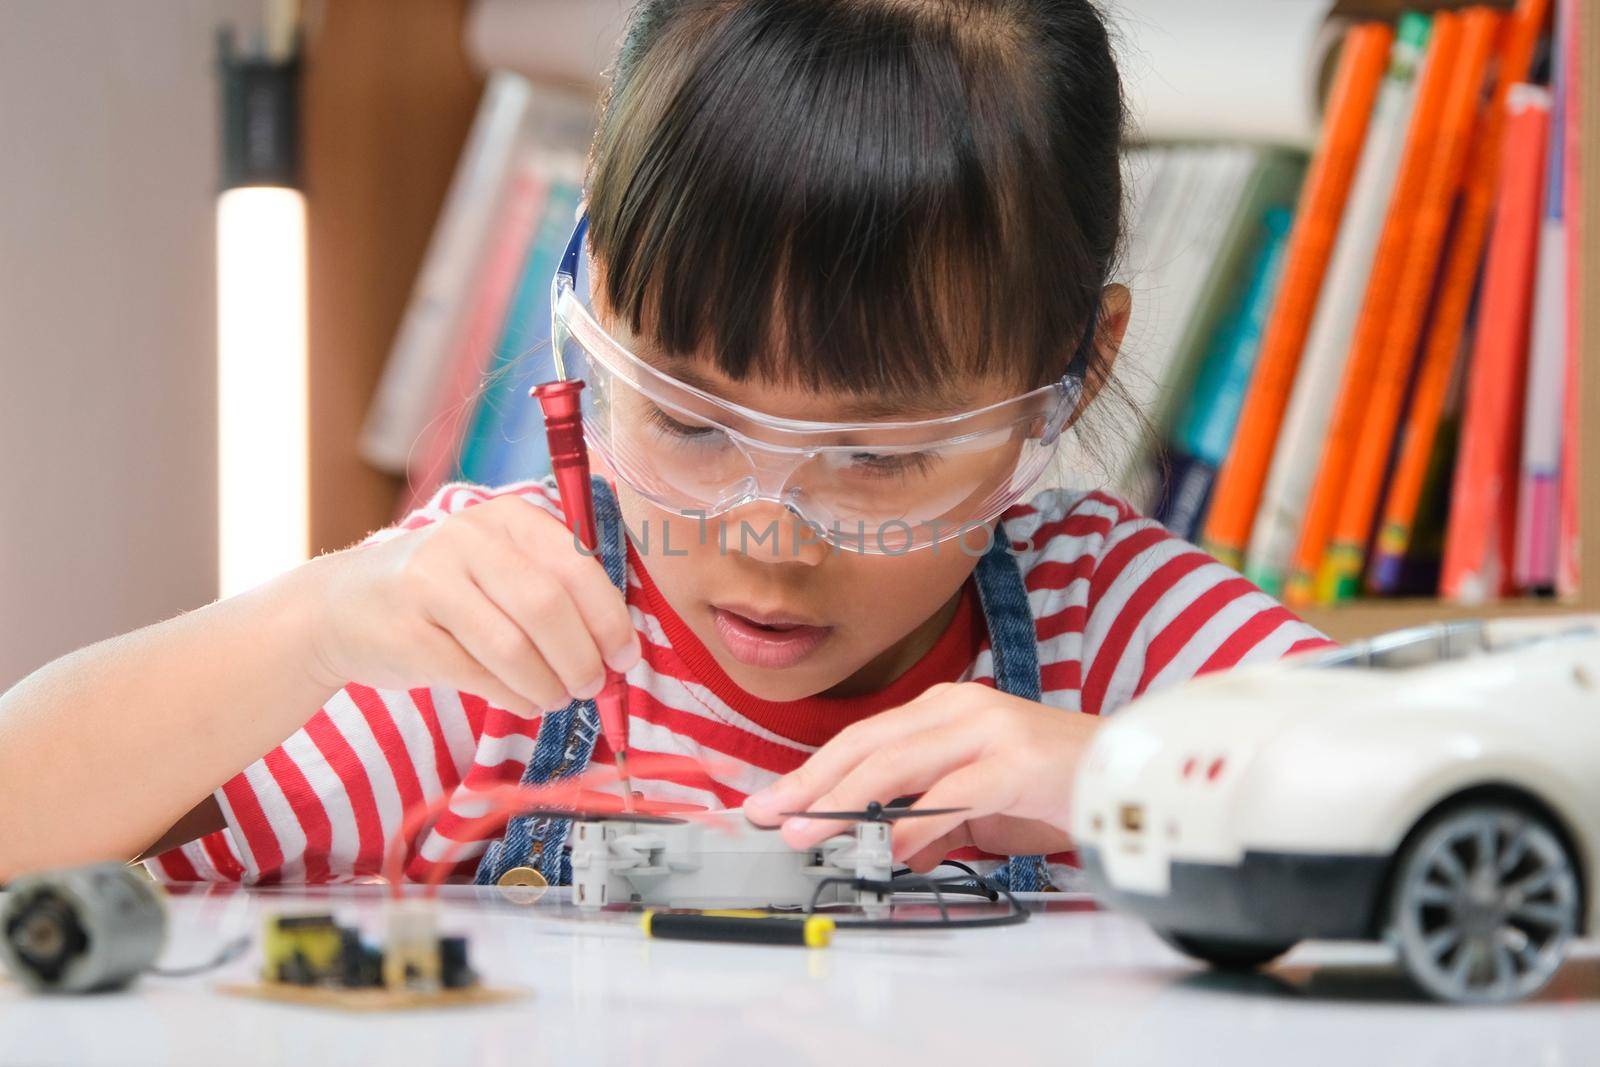 Concentrated little girl repairing her toy car with a tool in hand and carefully assembles toy car with screwdriver. STEM Hobbies for advanced smart kids.